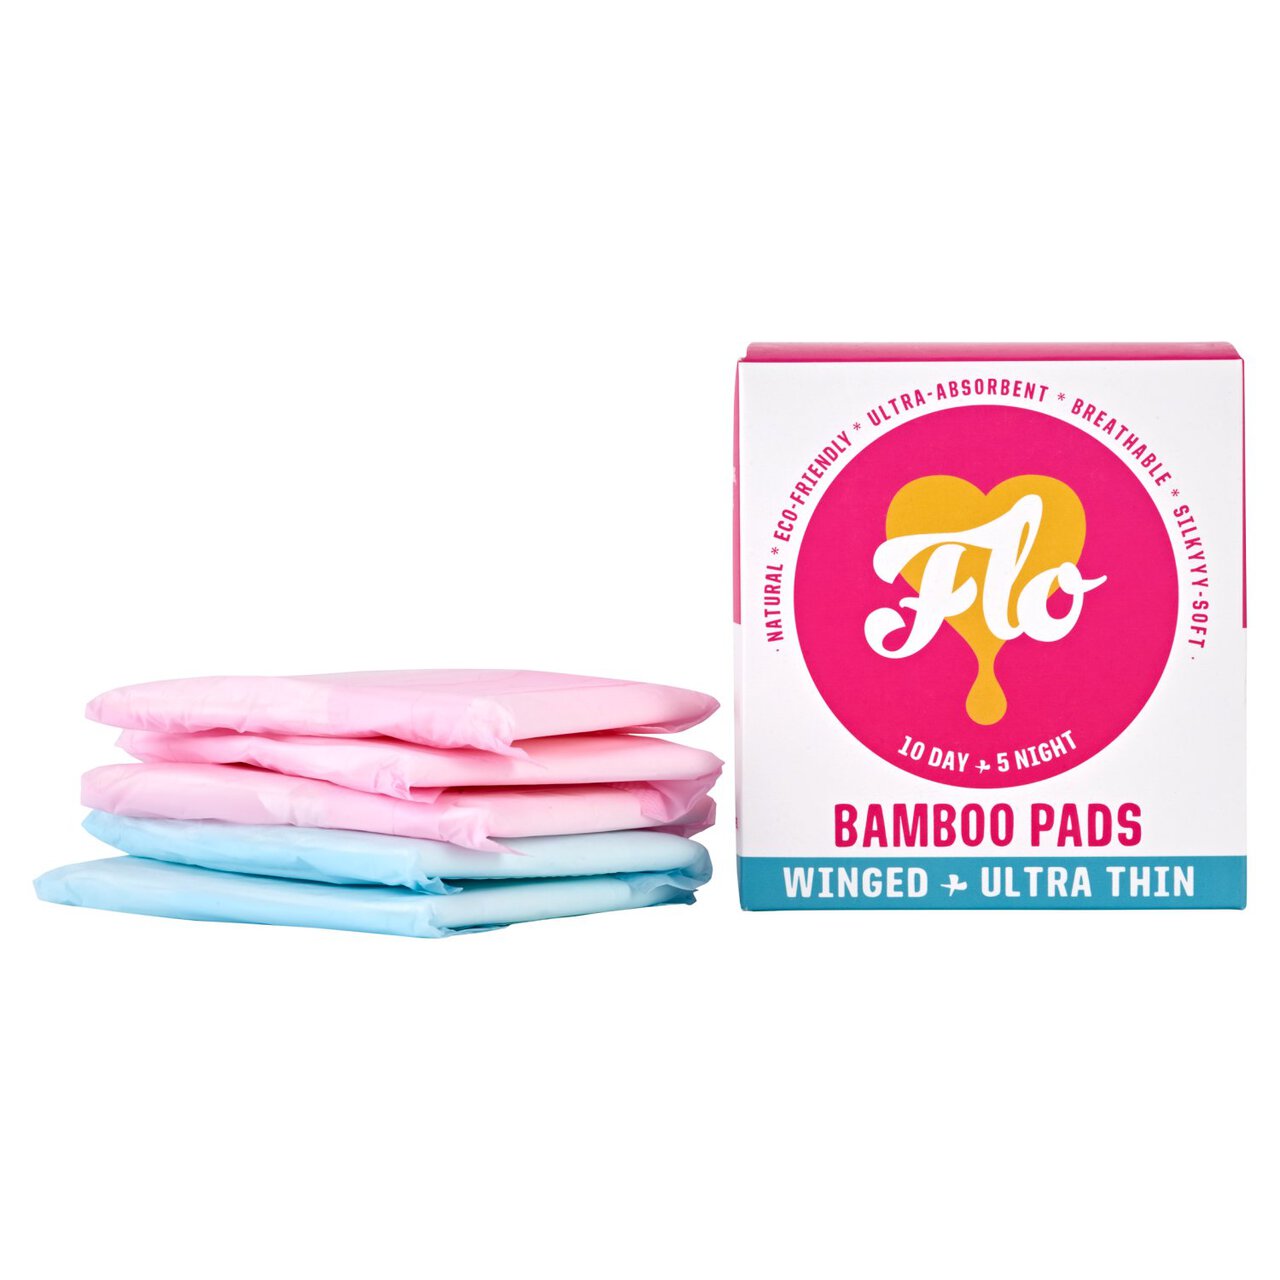 FLO Bamboo Sanitary Night & Day Pads, Winged & Ultra Thin 15 per pack